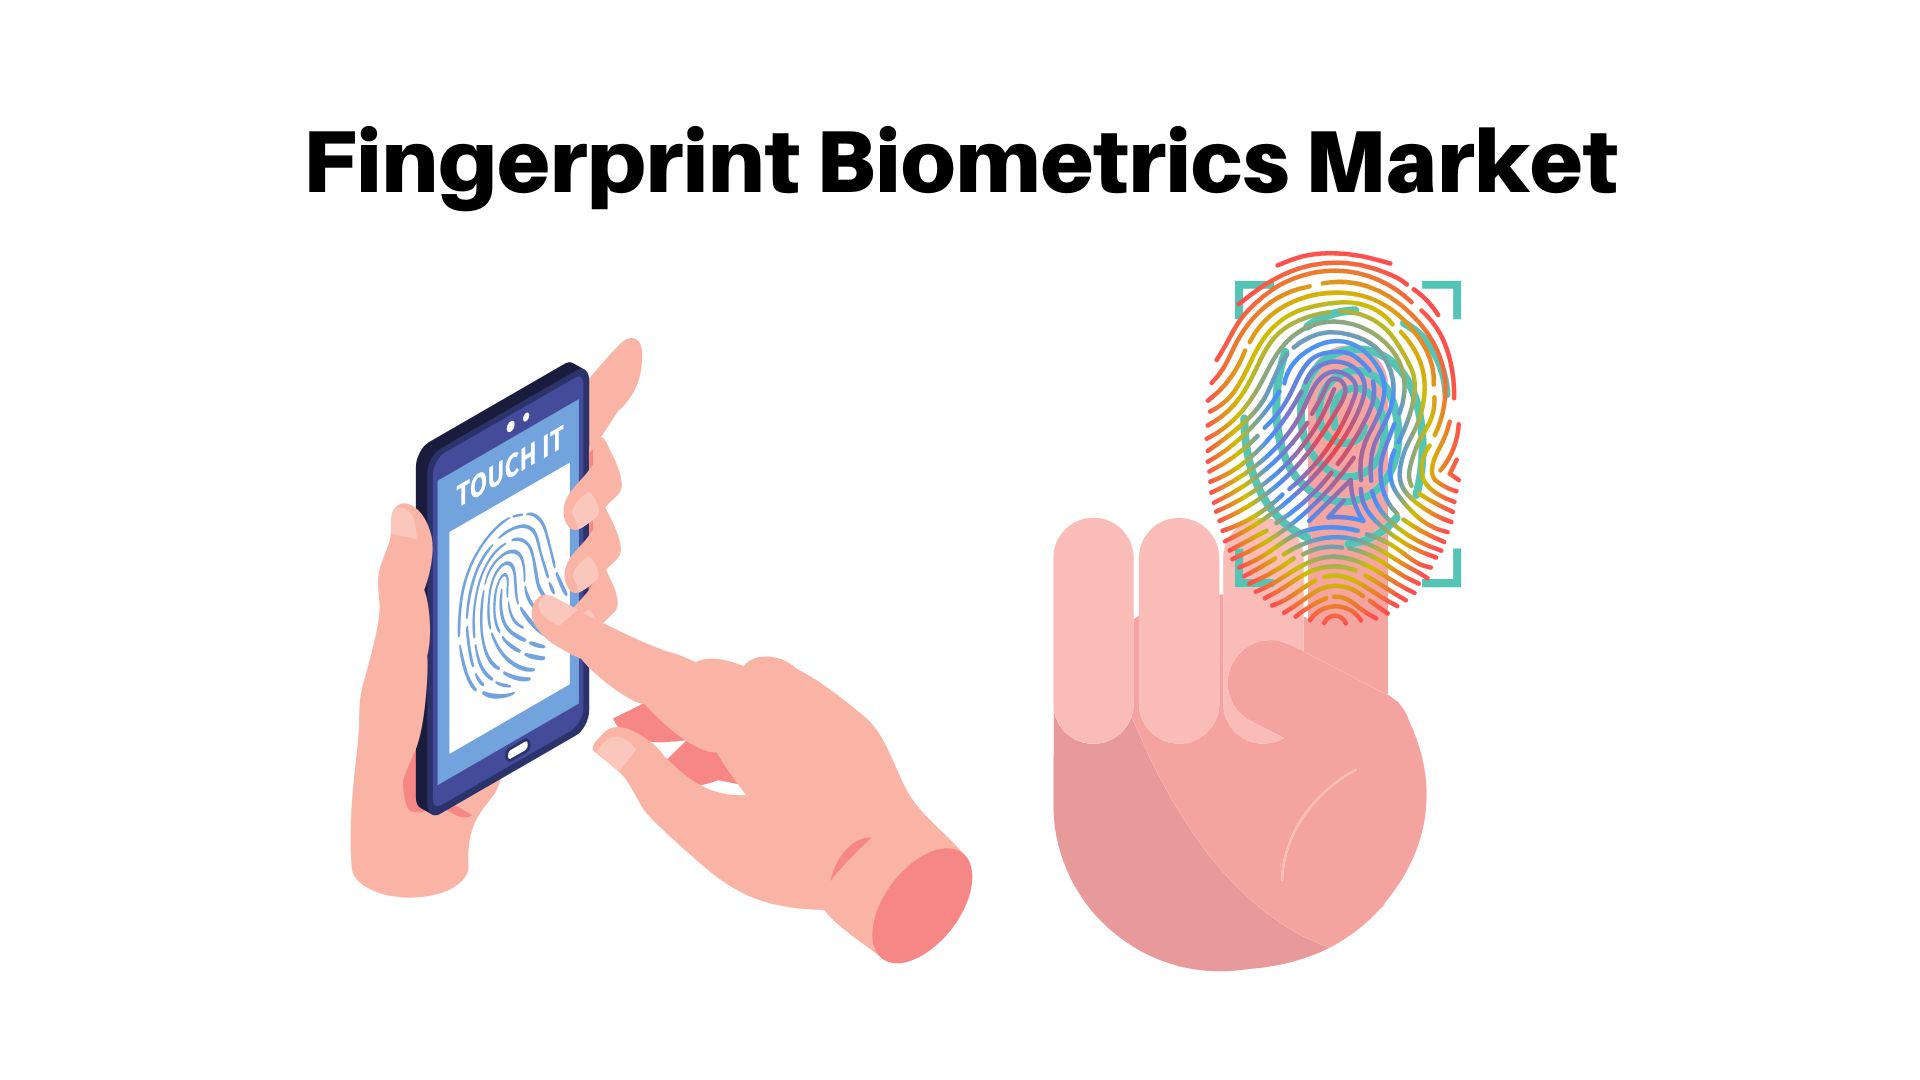 At a CAGR of 18%, Fingerprint Biometrics Market Size Could Hit the $23.3 Bn Mark by 2033